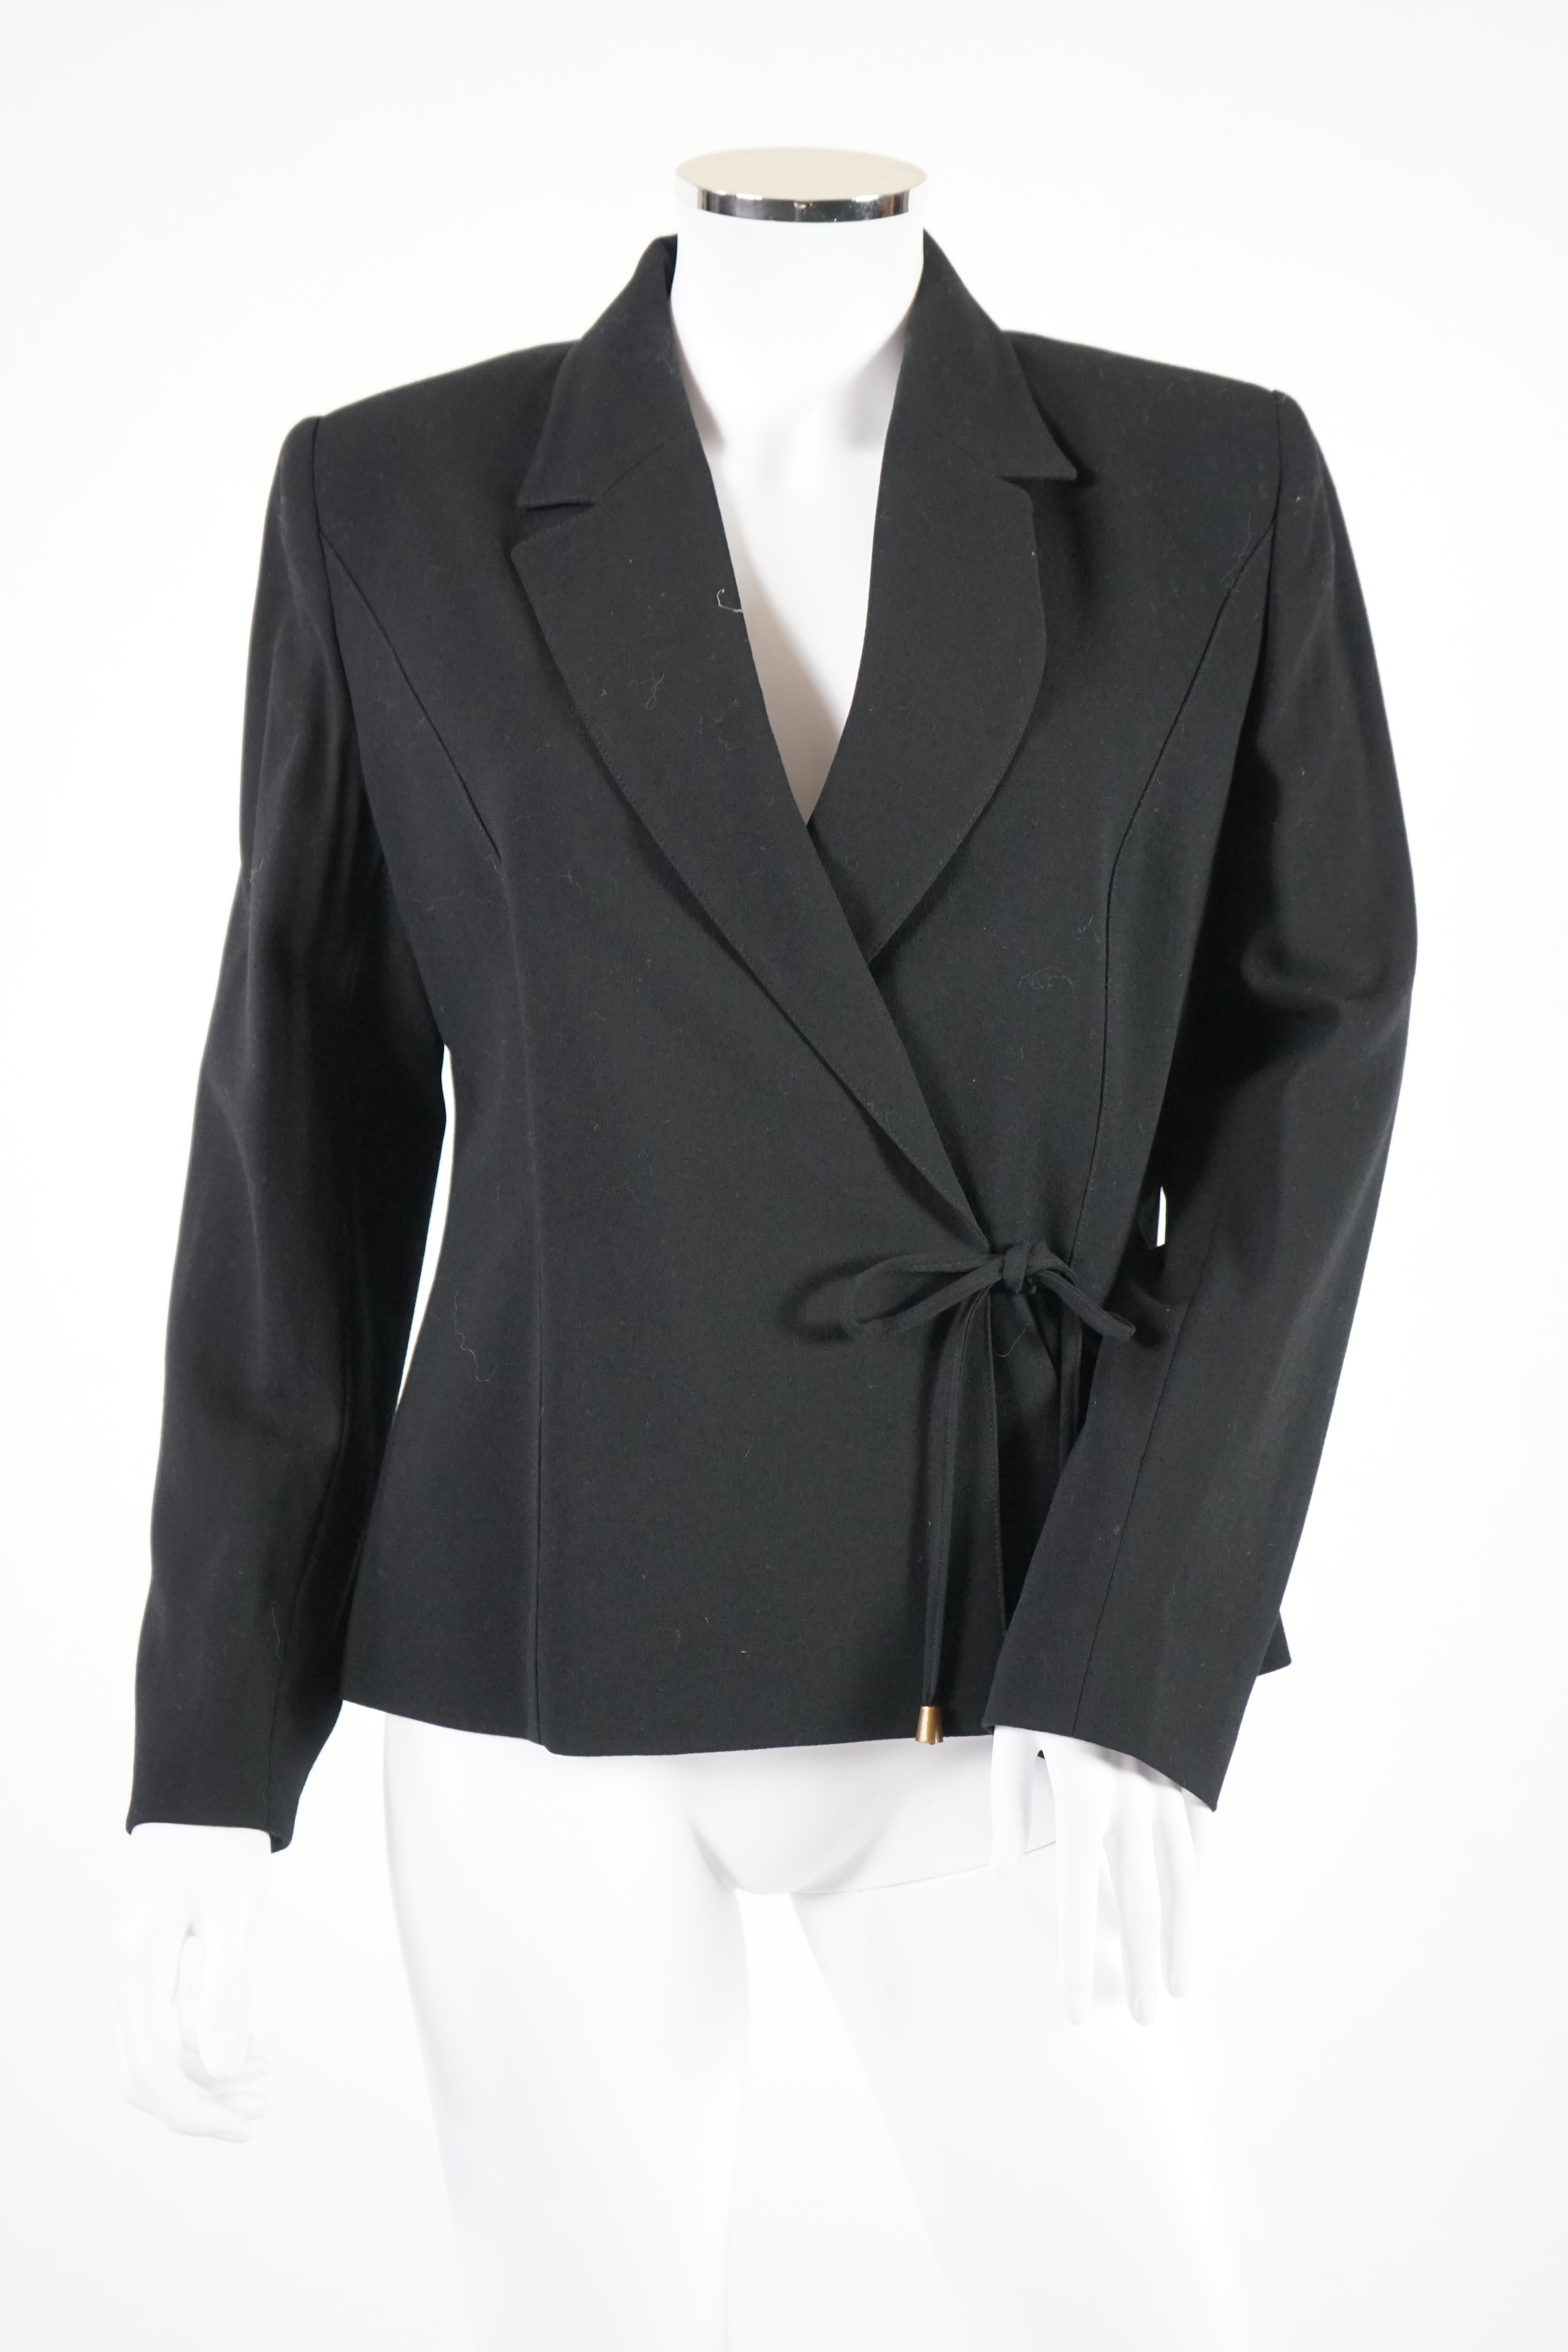 Two Louise Kennedy lady's suits: black with trousers and skirt, taupe long jacket with trousers. Approx size 14 Proceeds to Happy Paws Puppy Rescue